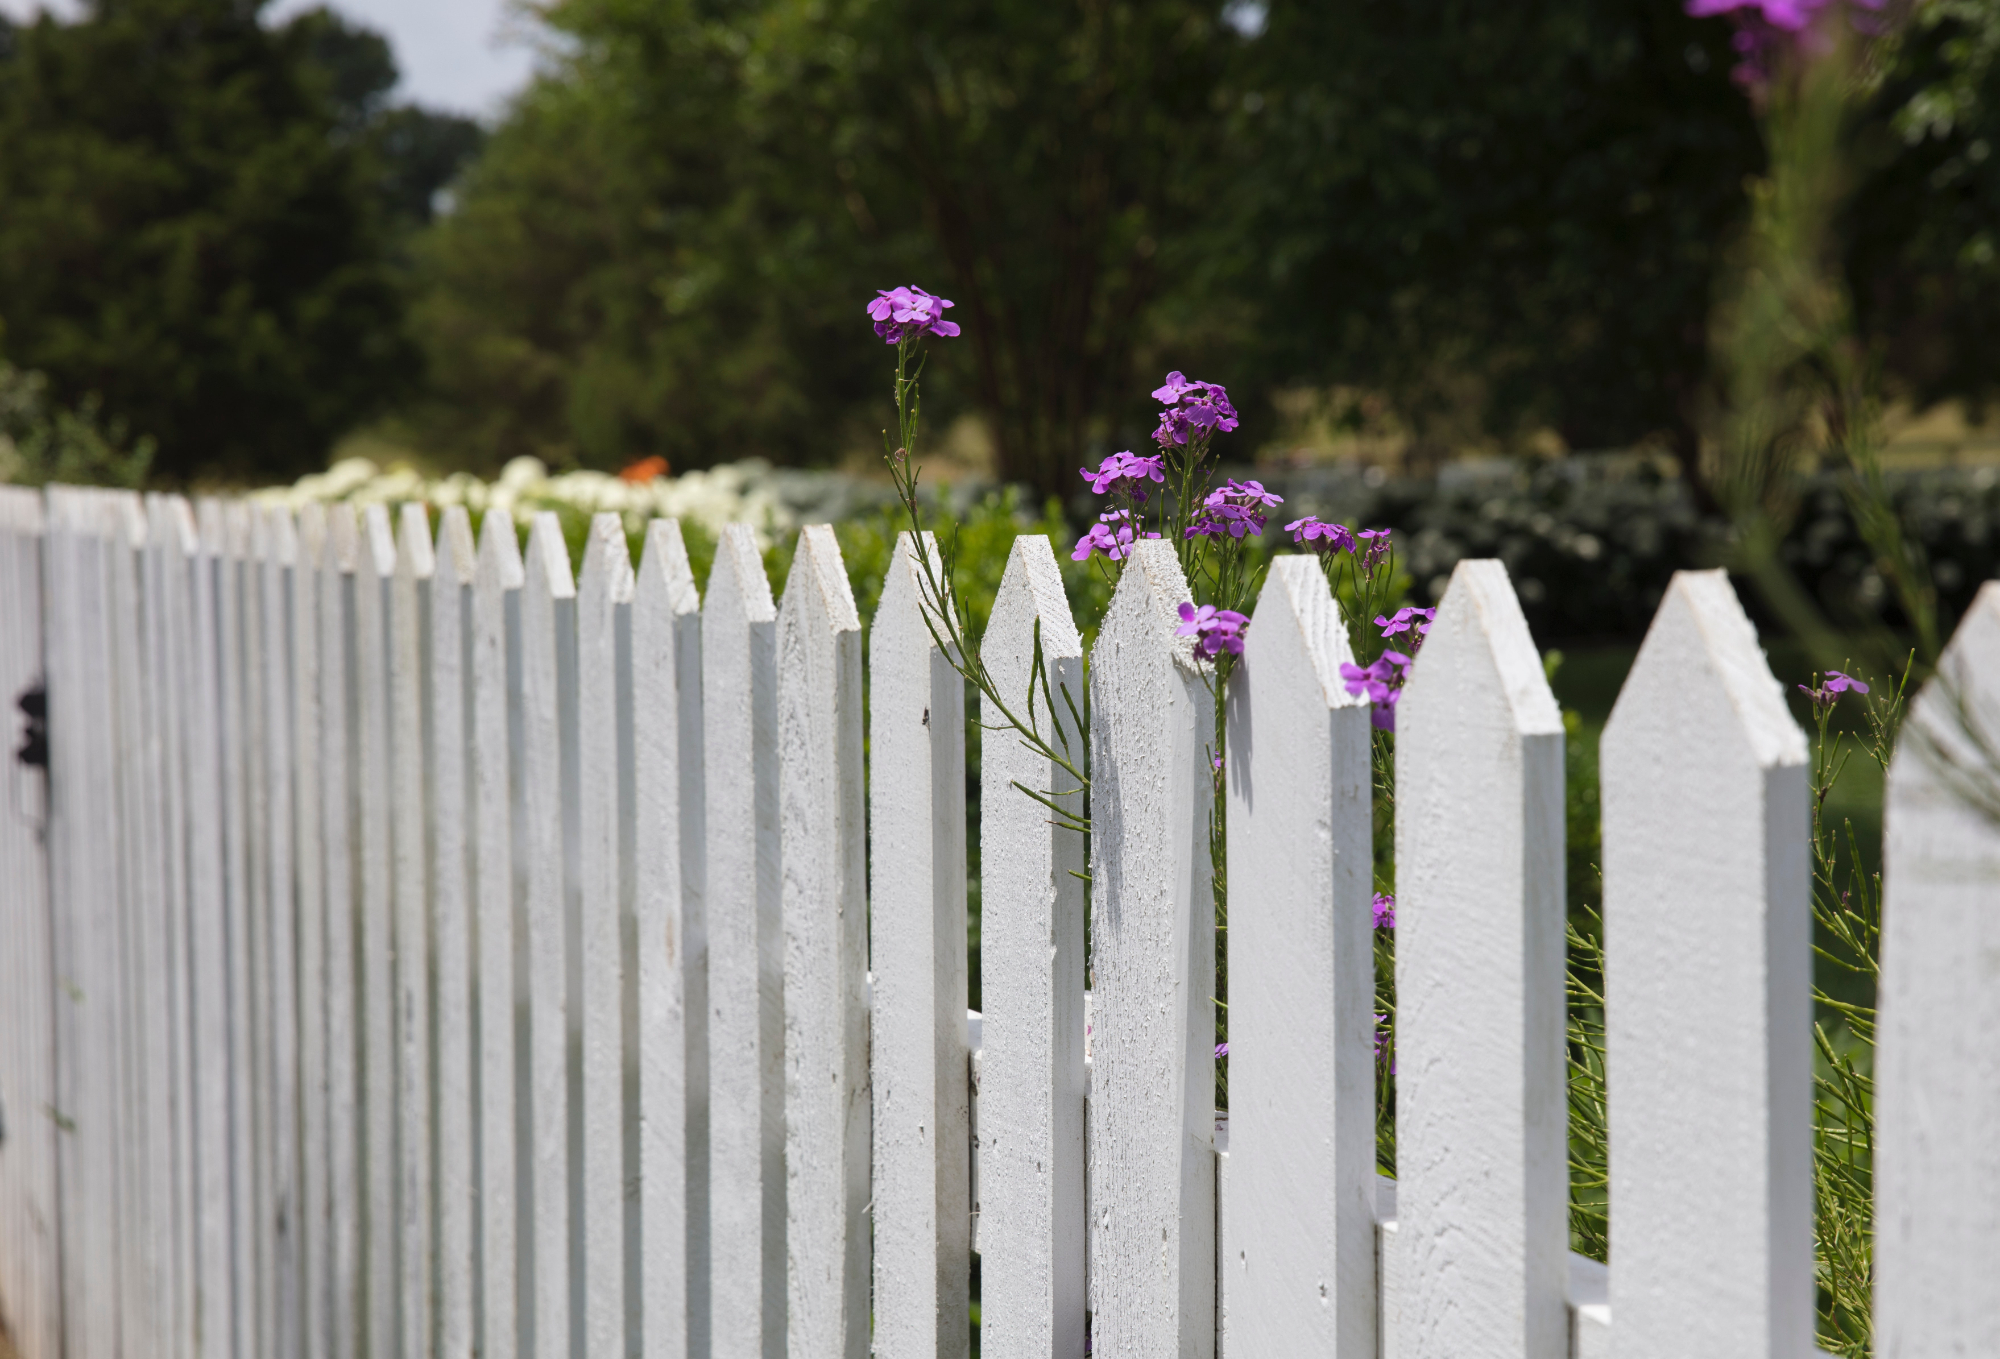 How to Repair a Wooden Fence